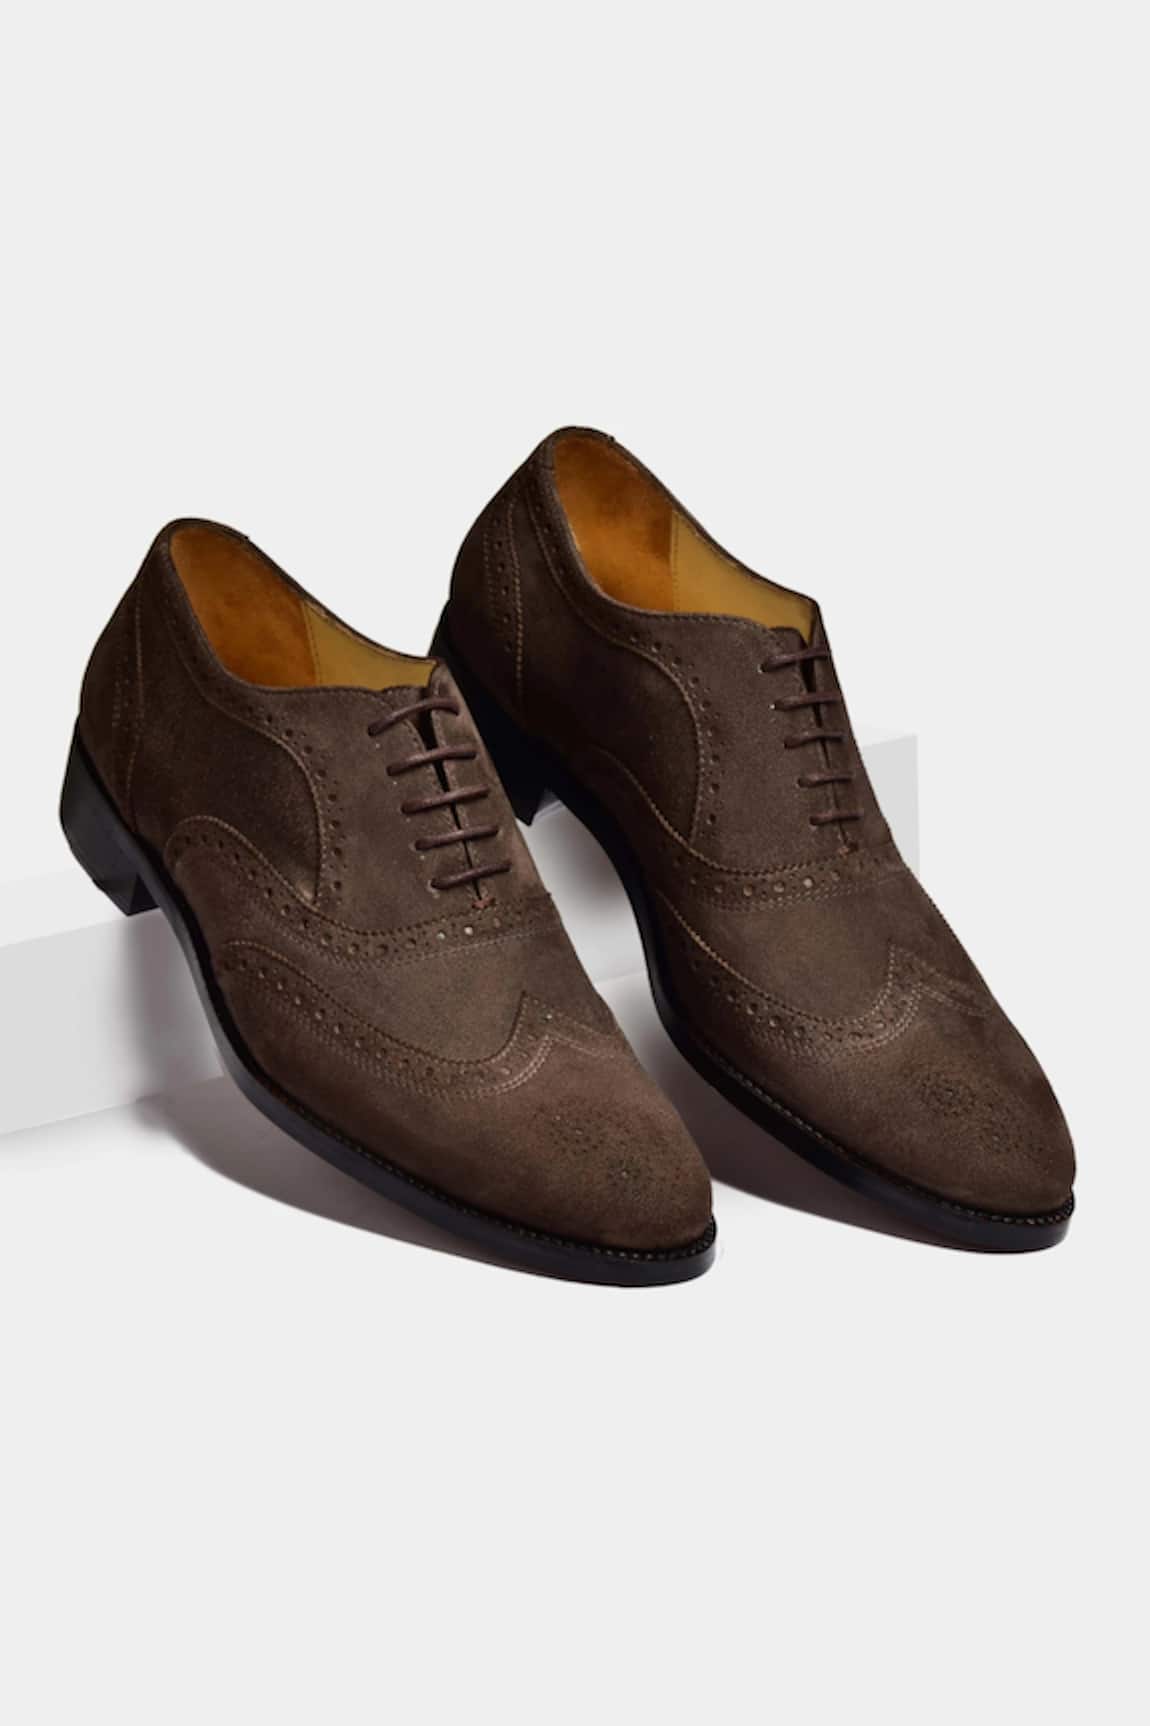 Luxoro Formello Suede Hand Painted Brogue Oxfords